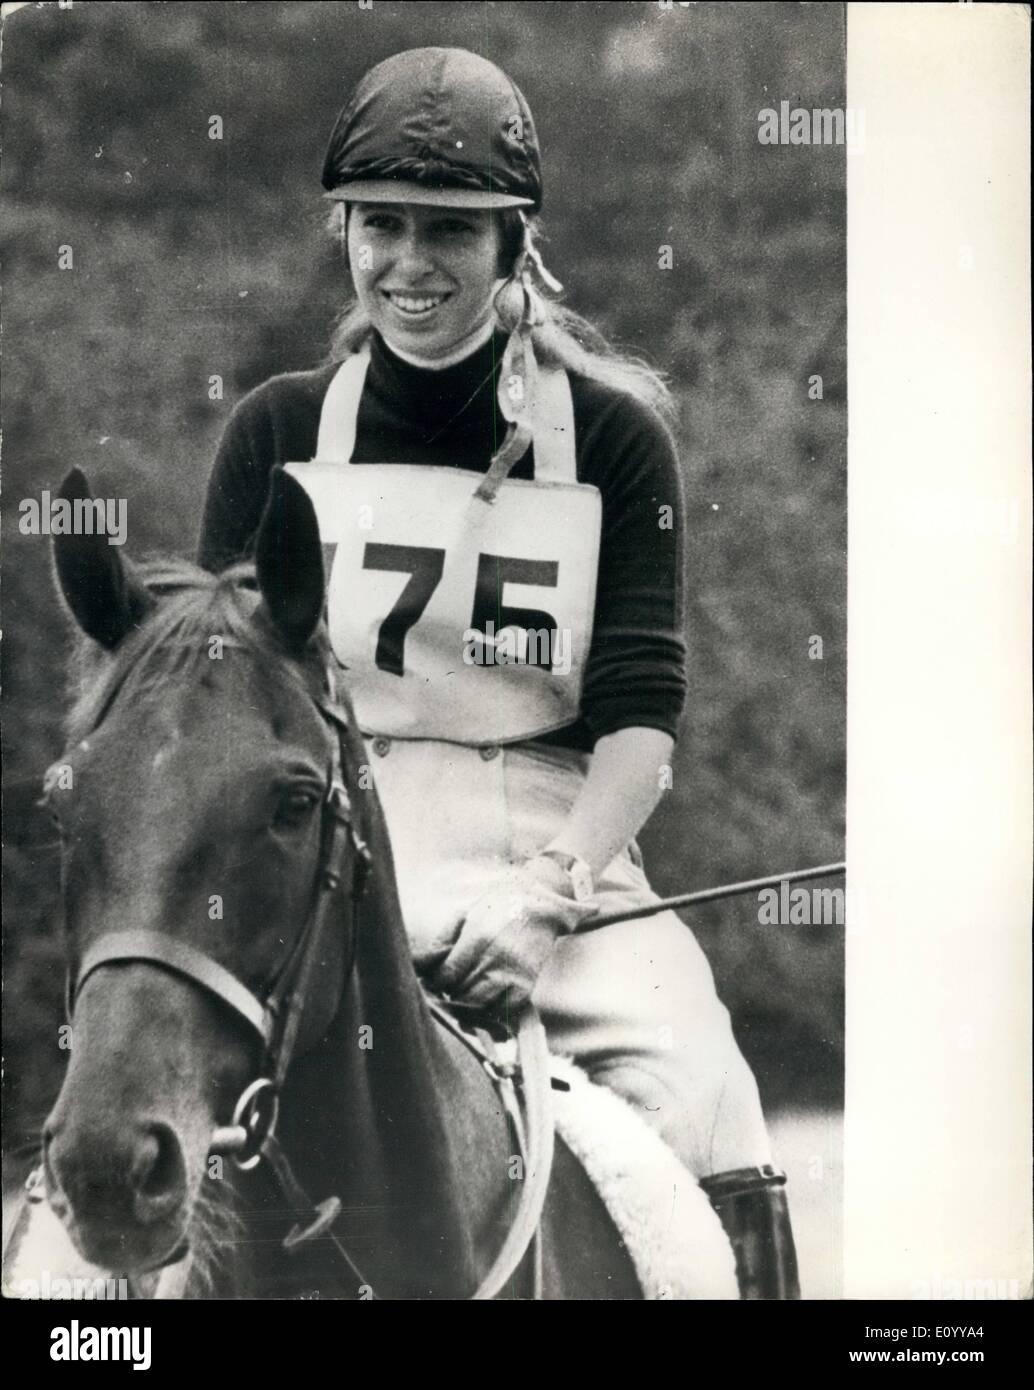 Nov. 11, 1971 - Princess Anne voted sport woman of the year: Princes Anne has been voted Sports woman of the year by the Sportswriters' Association. The Princess in the reigning individual European Champion for the equestrian three day event, She won the title at the Burghley International Horse Trials in September. Photo shows Princess Anne pictured on her horse doublet, when she competed in the Eridge Horse Trials last August. Stock Photo